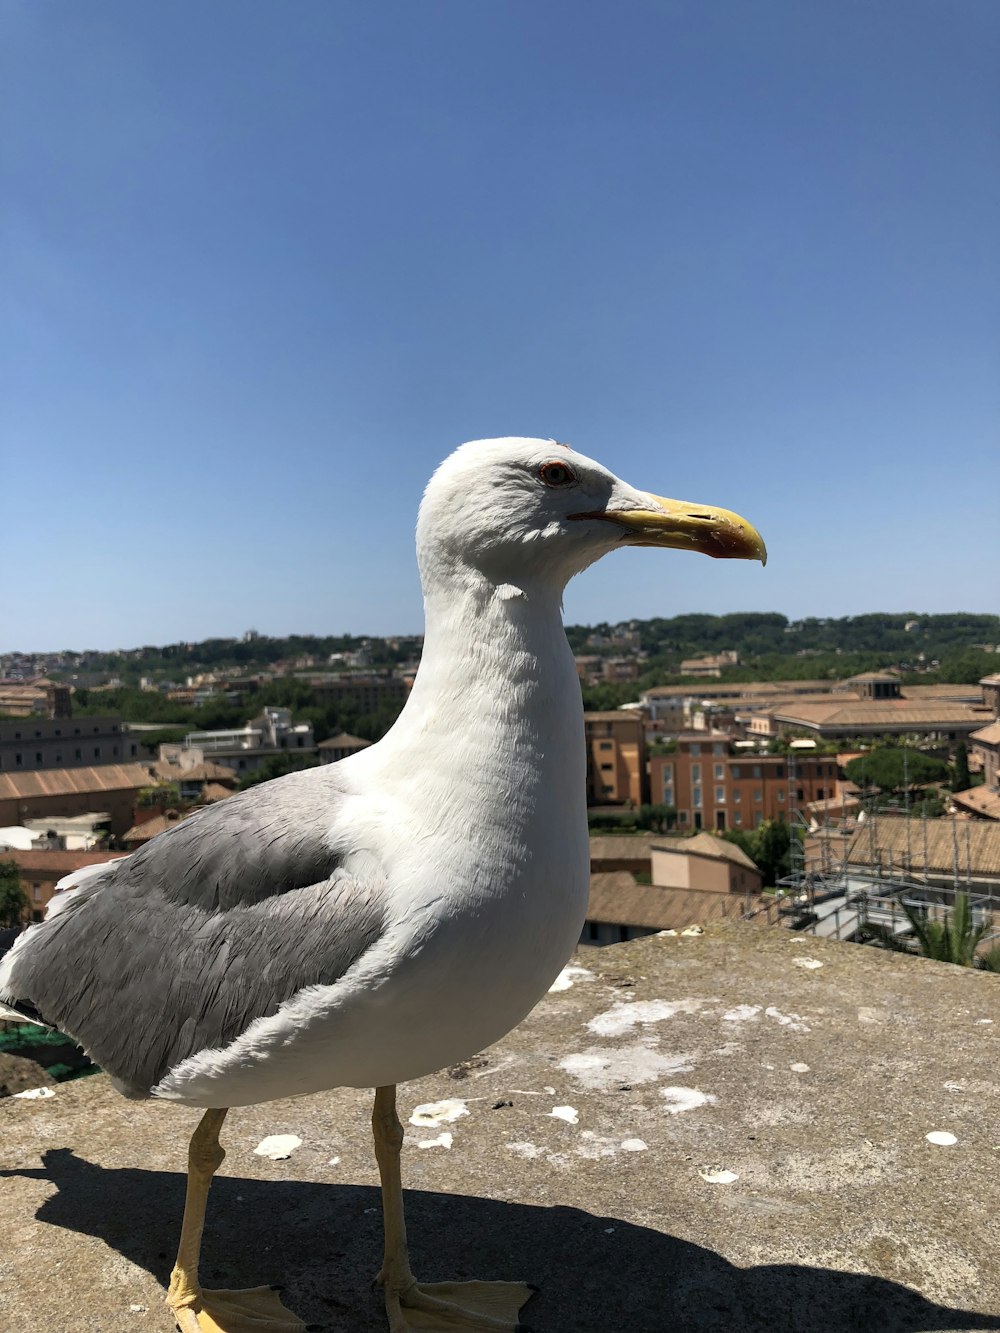 a seagull standing on a stone surface with buildings in the background